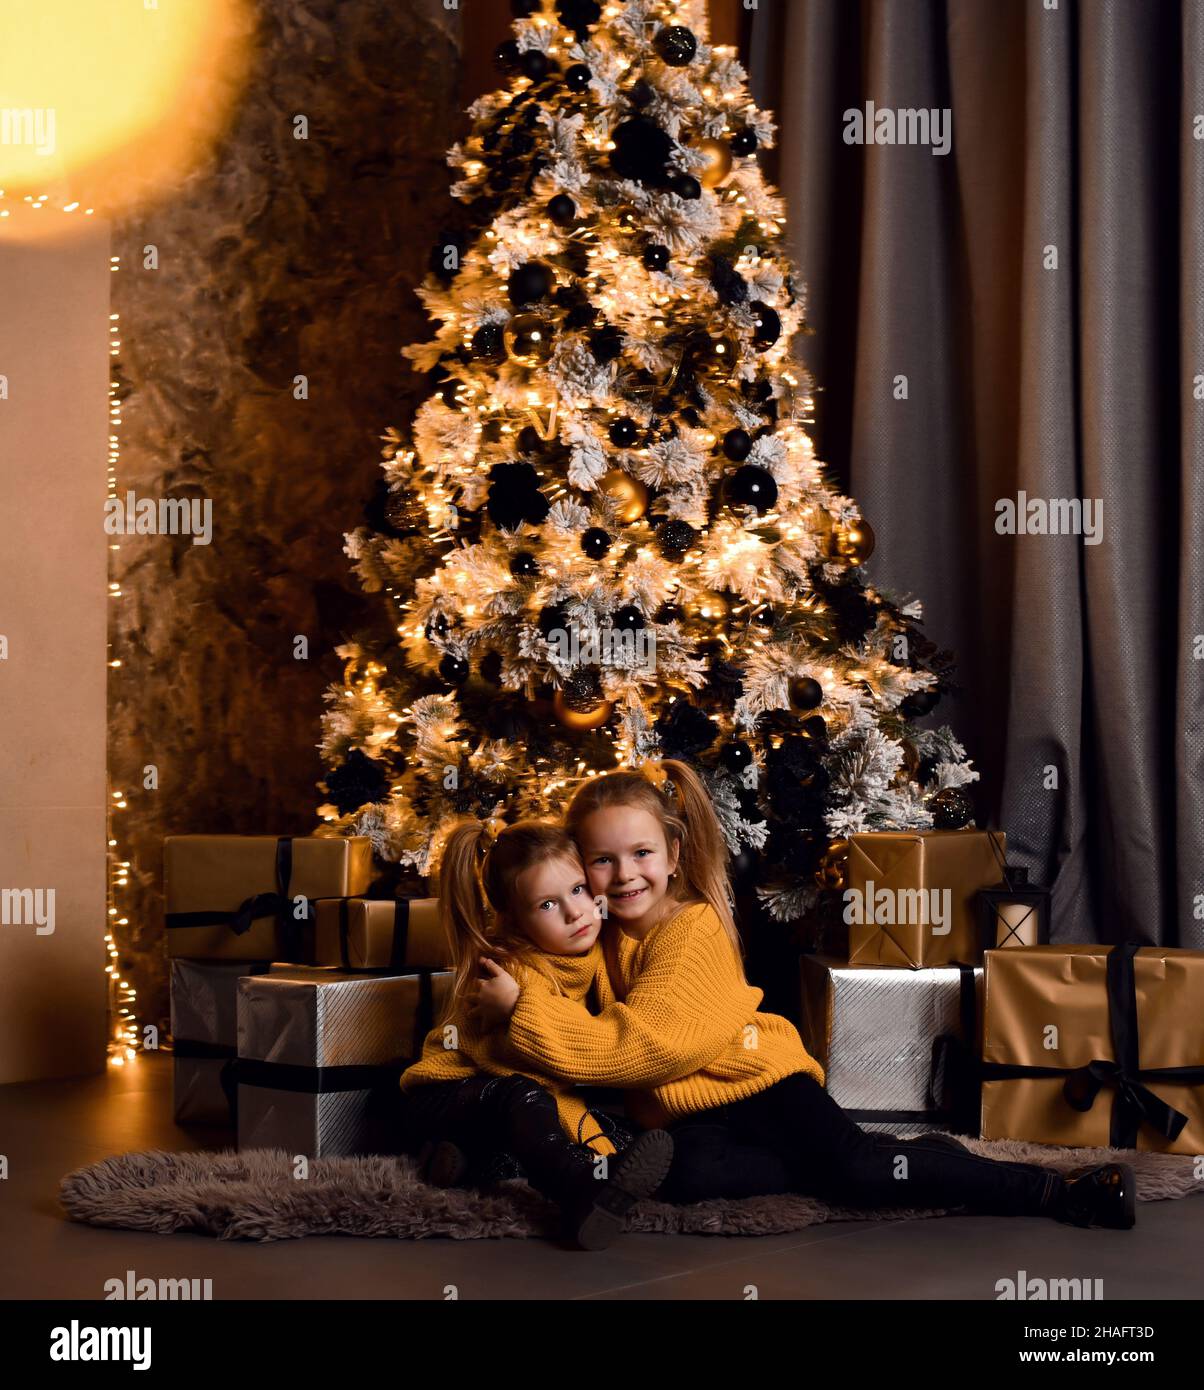 Happy small girls sisters in yellow sweaters sitting on floor together, hugging looking at camera over decorated Christmas tree Stock Photo